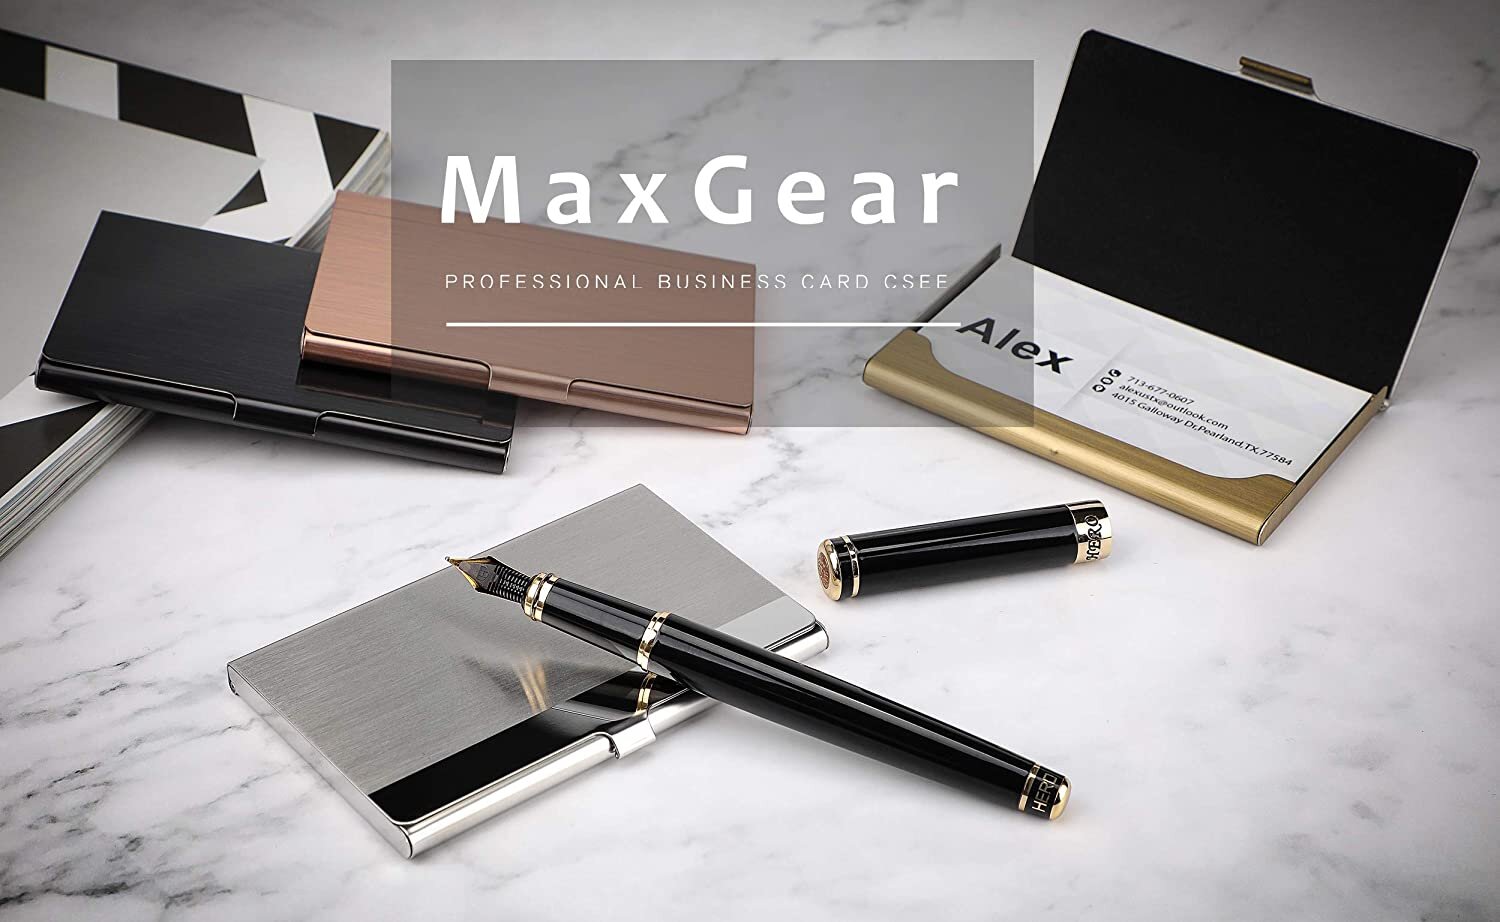 Stainless Steel Gold 3.7 x 2.3 x 0.3 inches MaxGear Professional Metal Business Card Holder Pocket Business Card Case Slim Business Card Wallet Business Card Carrier for Men & Women 